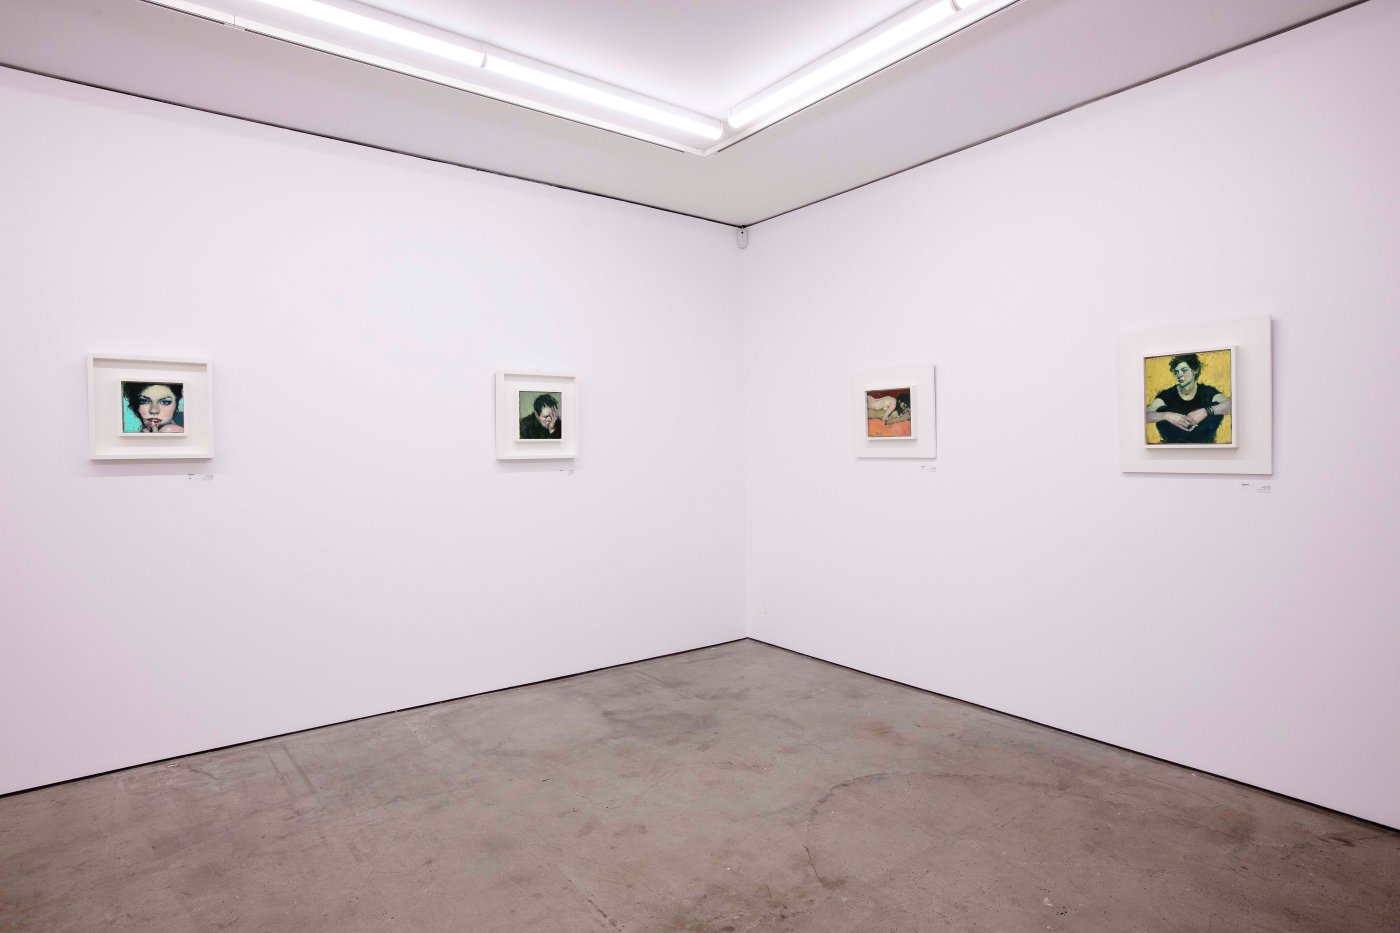 Installation image for Malcolm Liepke: Do You See Me?, at Pontone Gallery